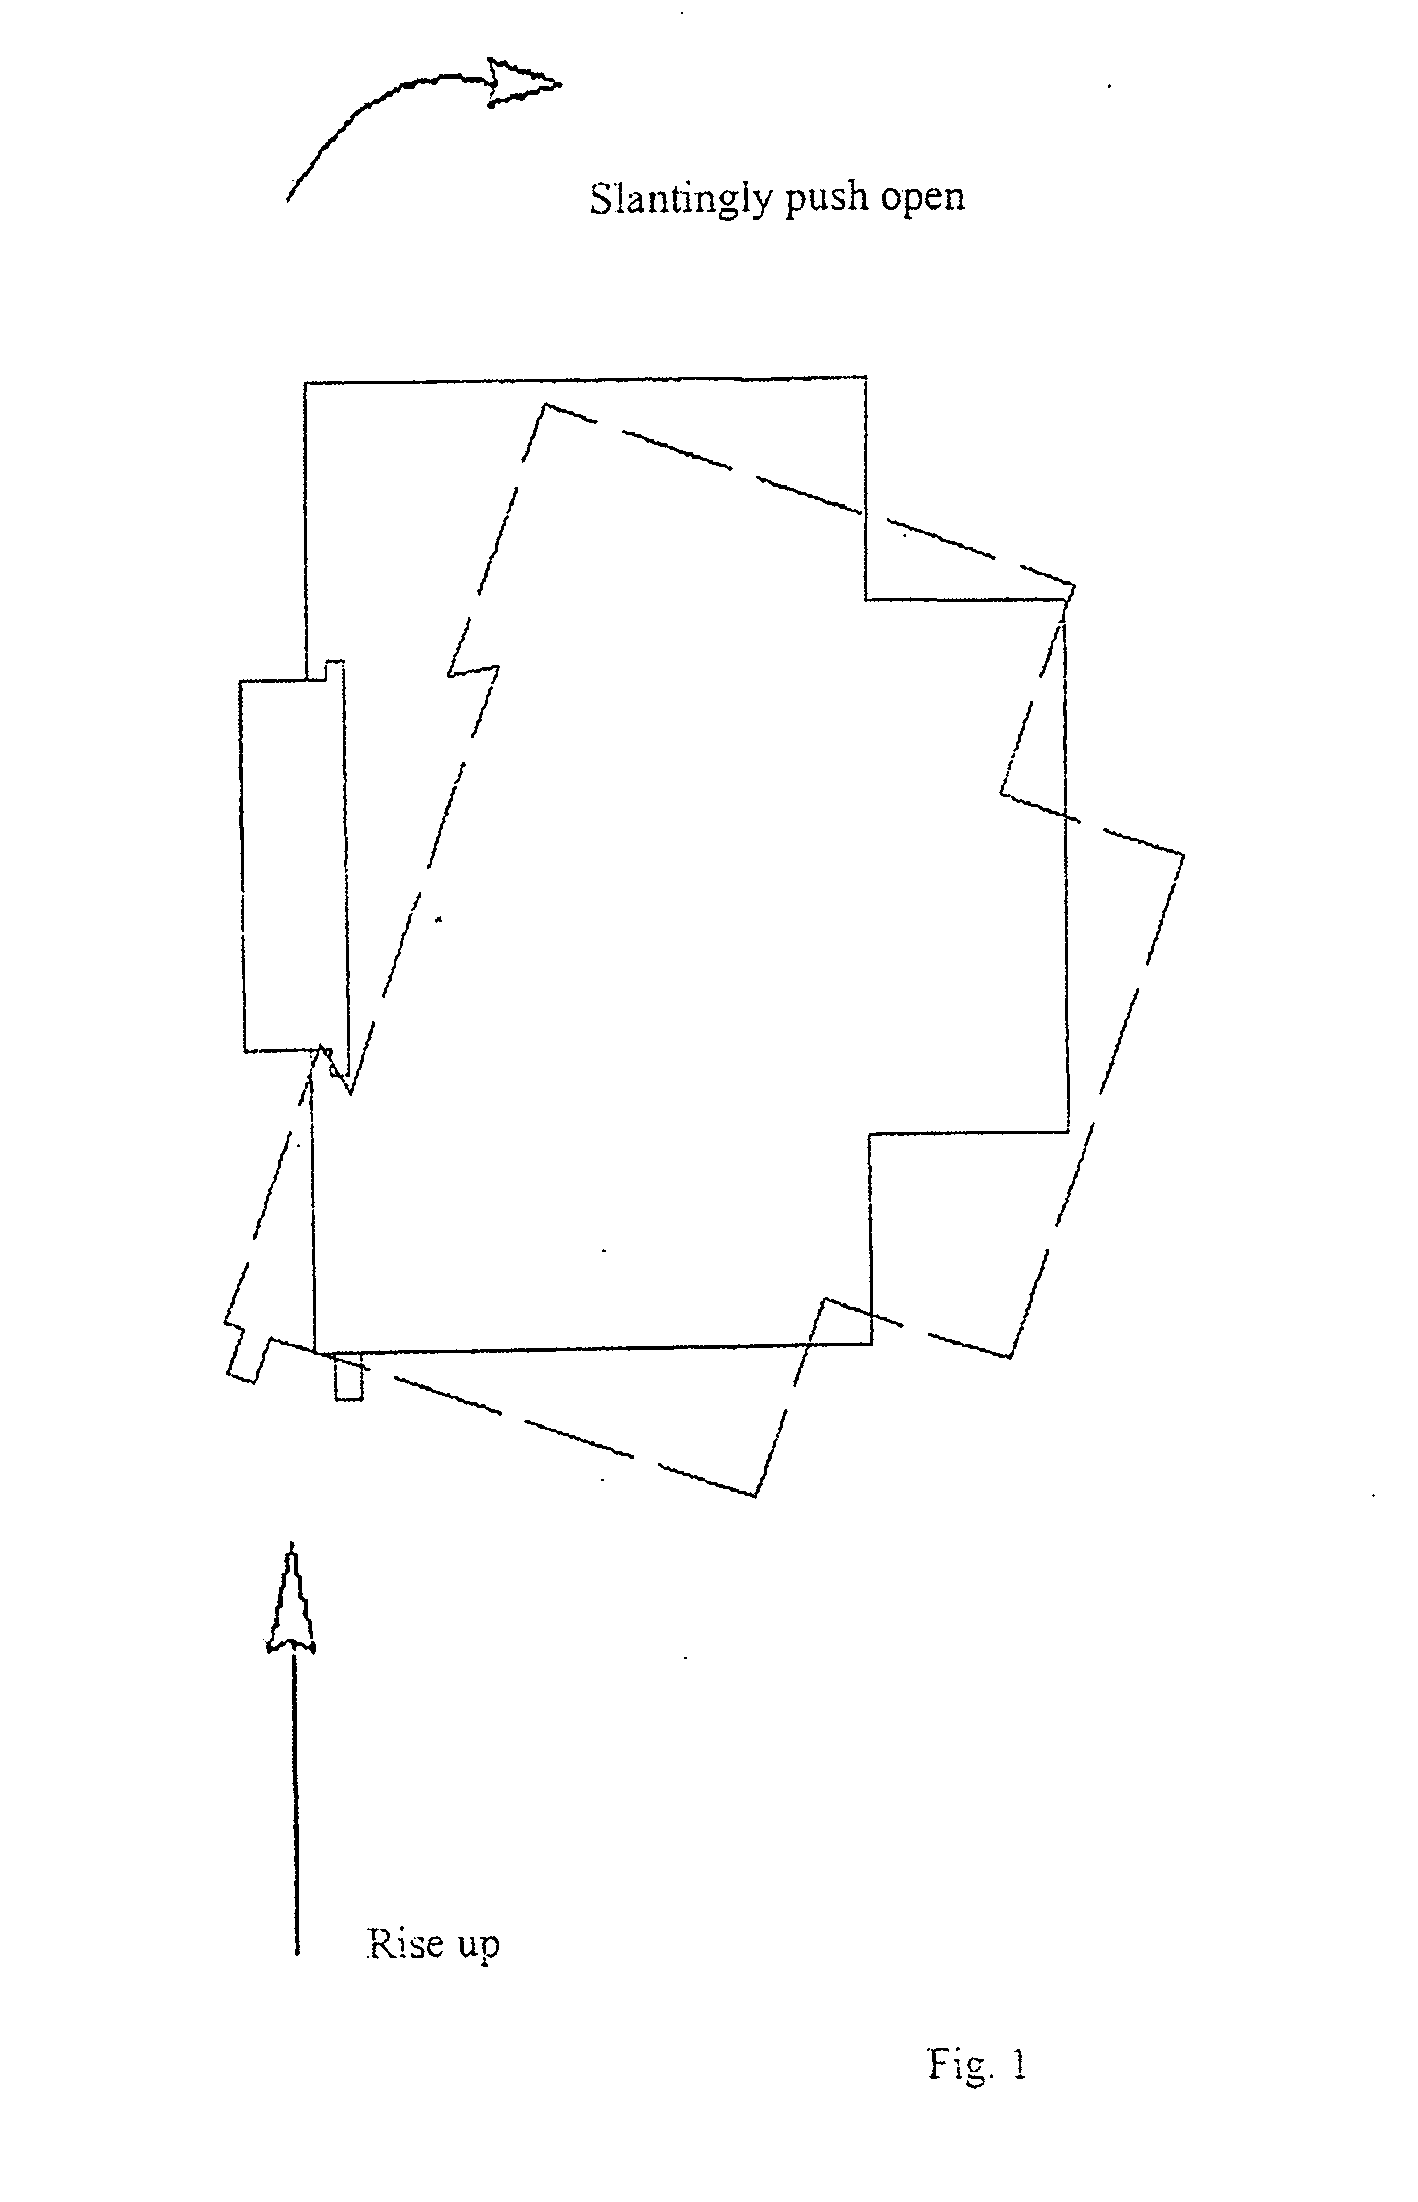 Mounting and fixing apparatus for analog-to-digital electrical equipment